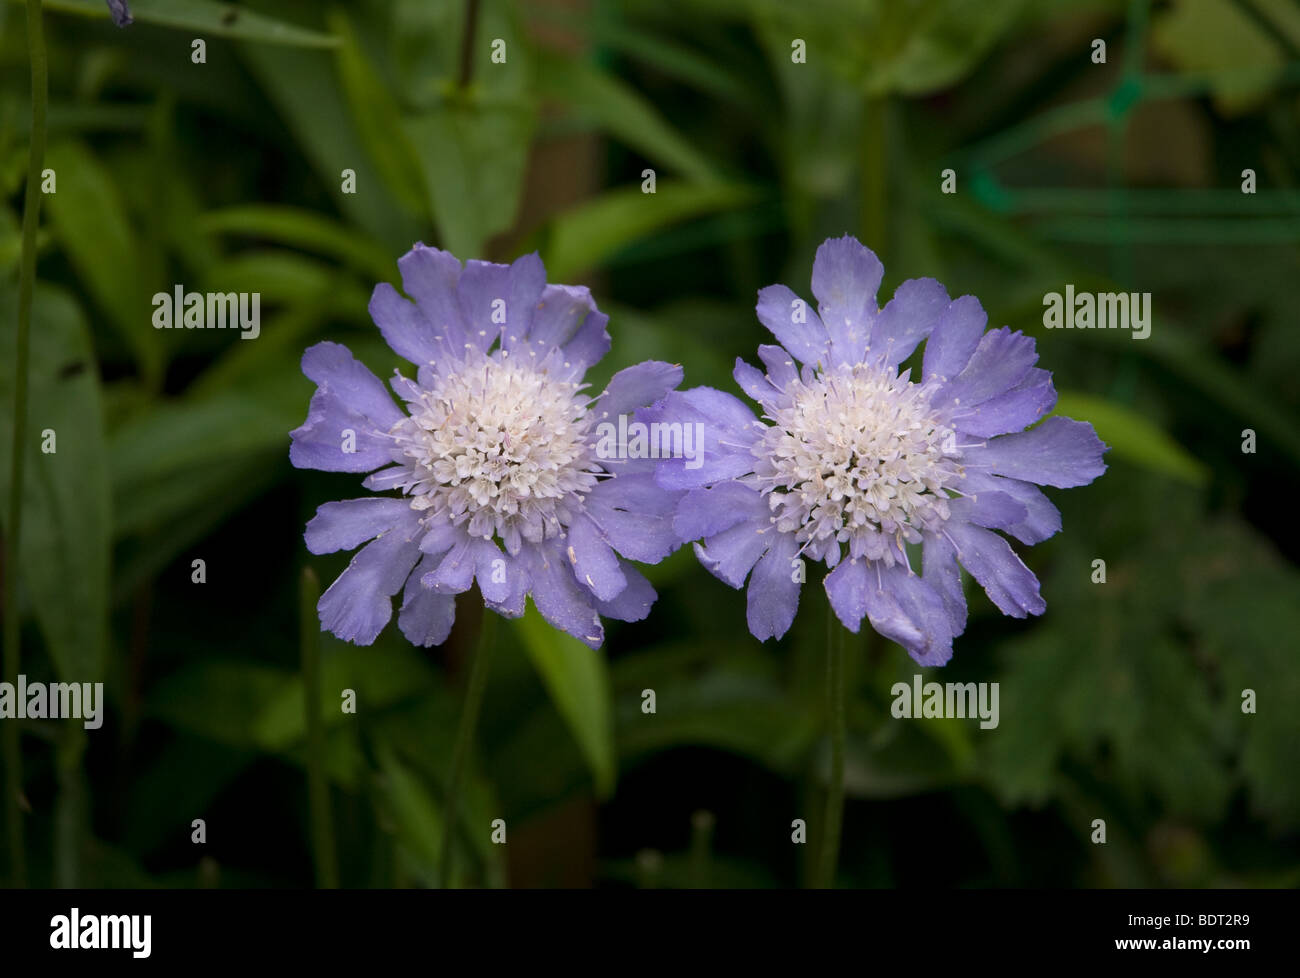 Two Scabious Scabiosa Dipsacaceae flowers, London UK Stock Photo